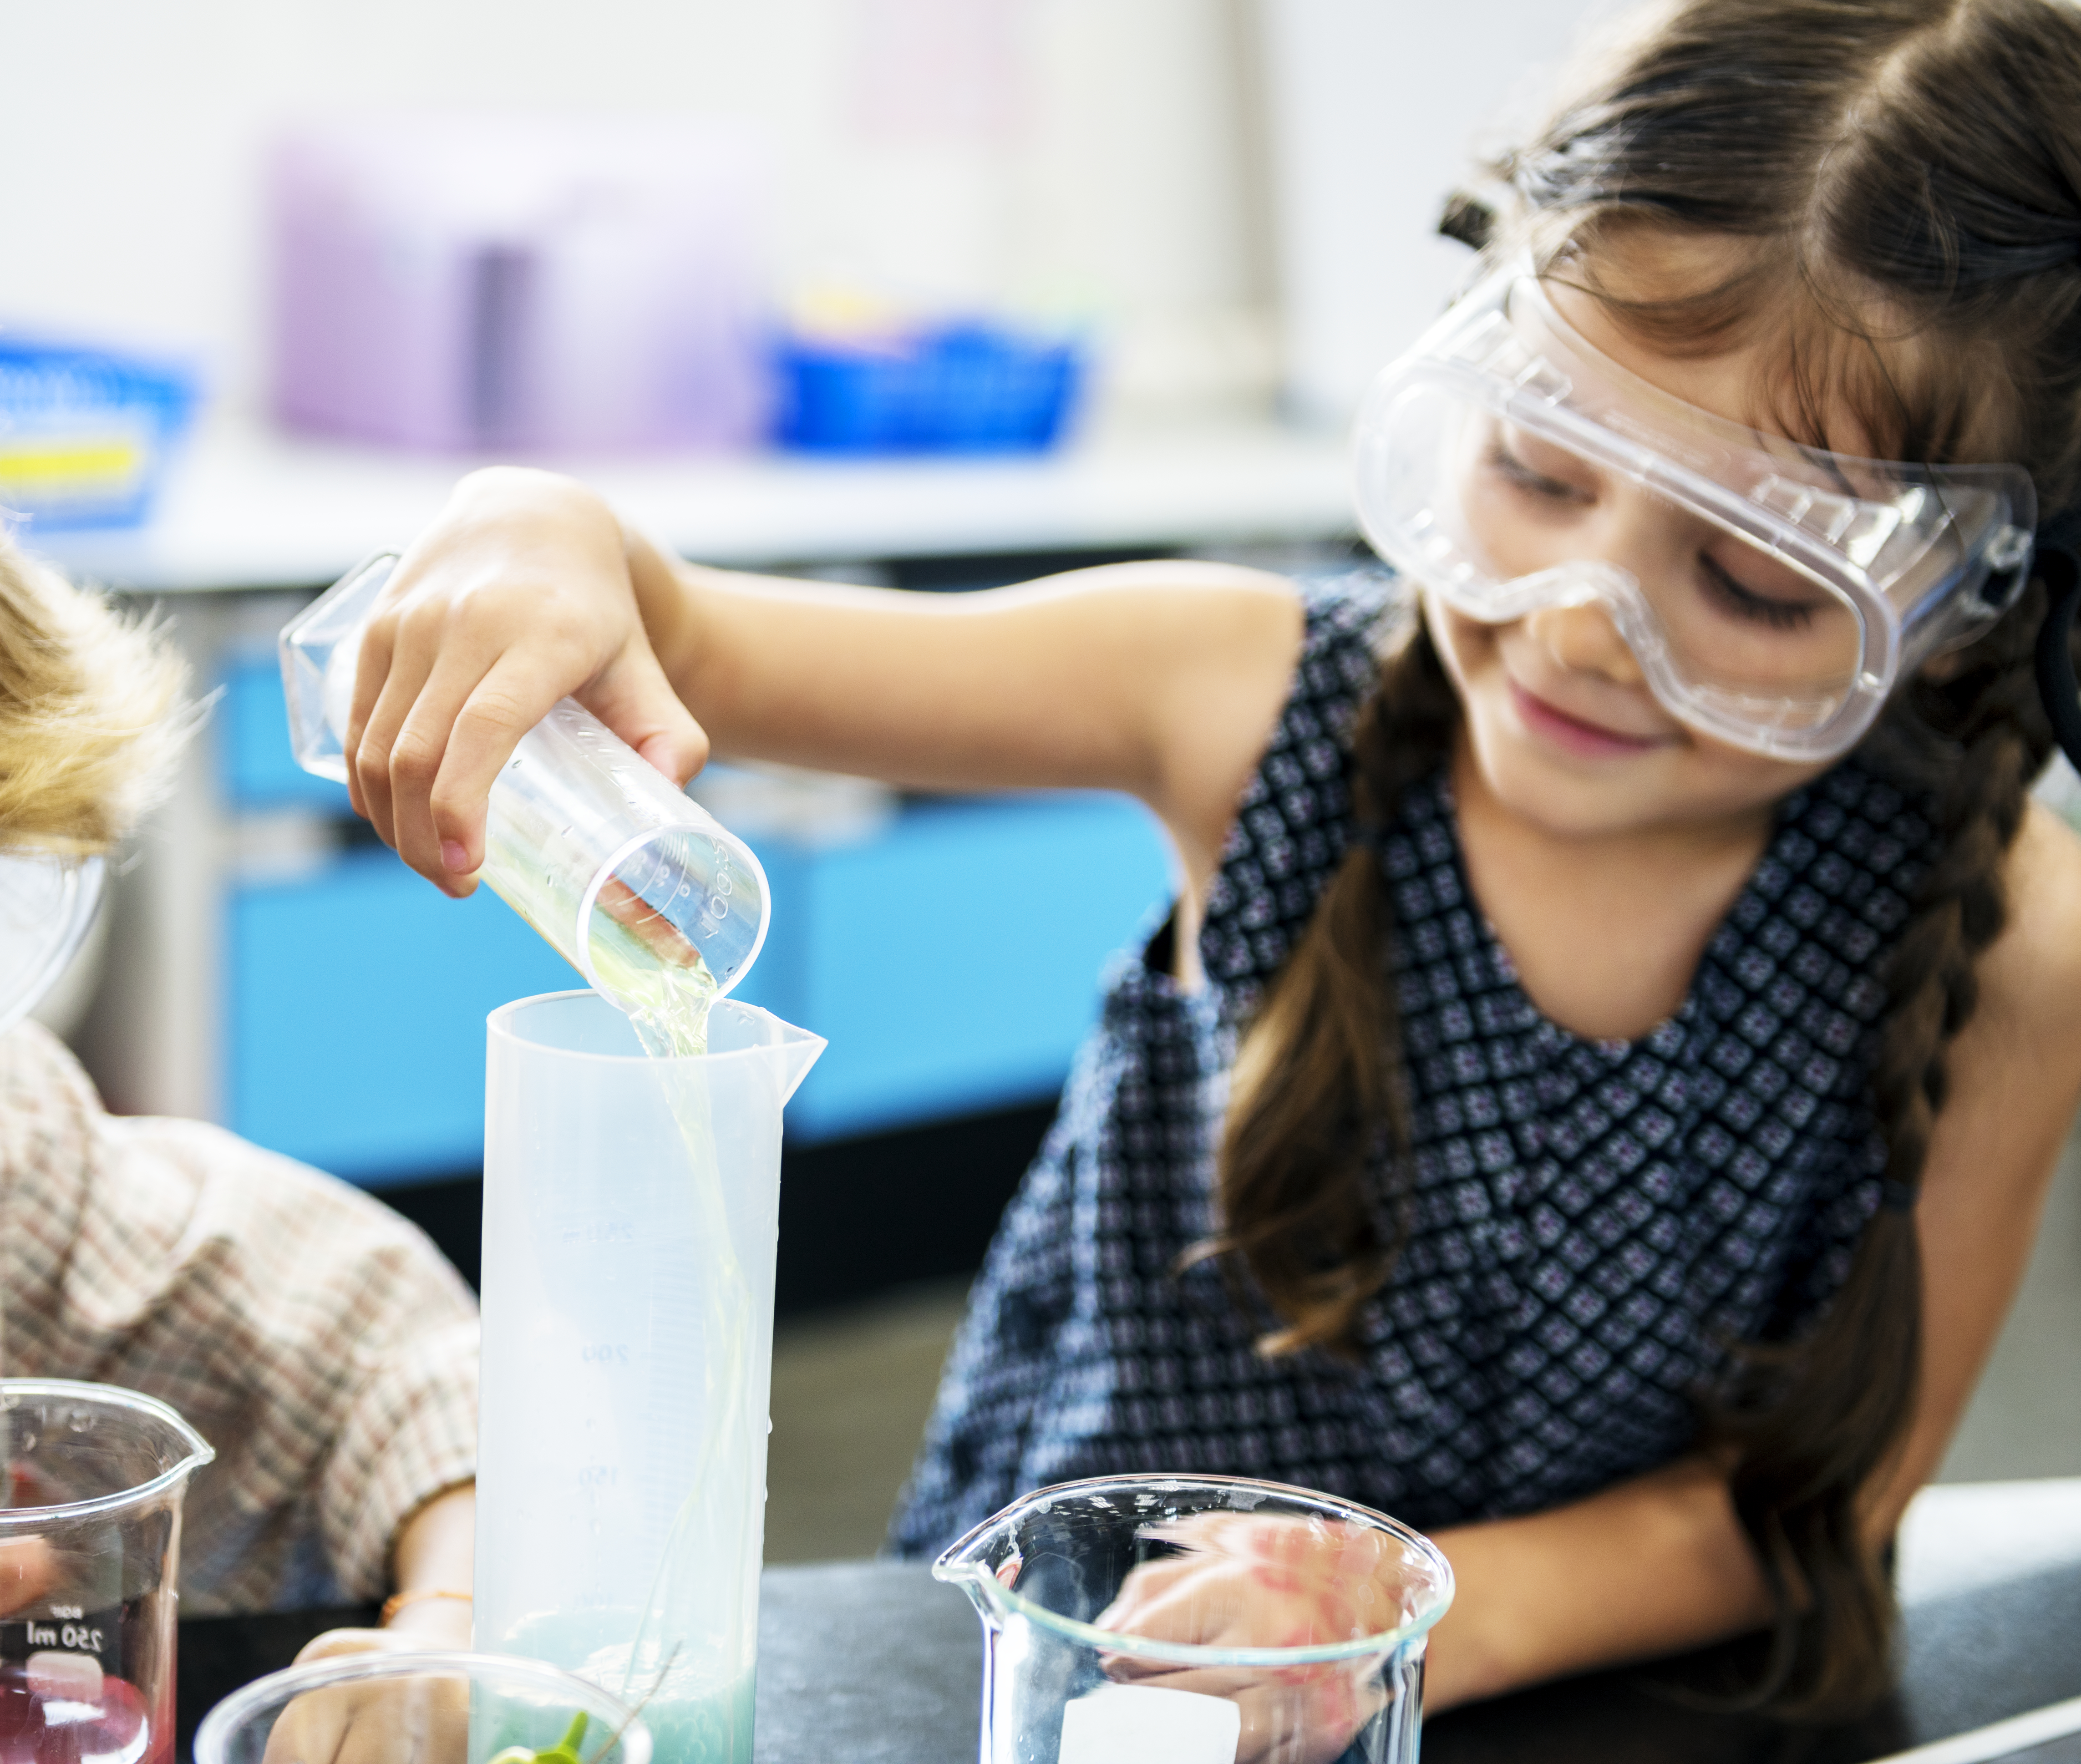 Girl wearing safety goggles doing science experiments.